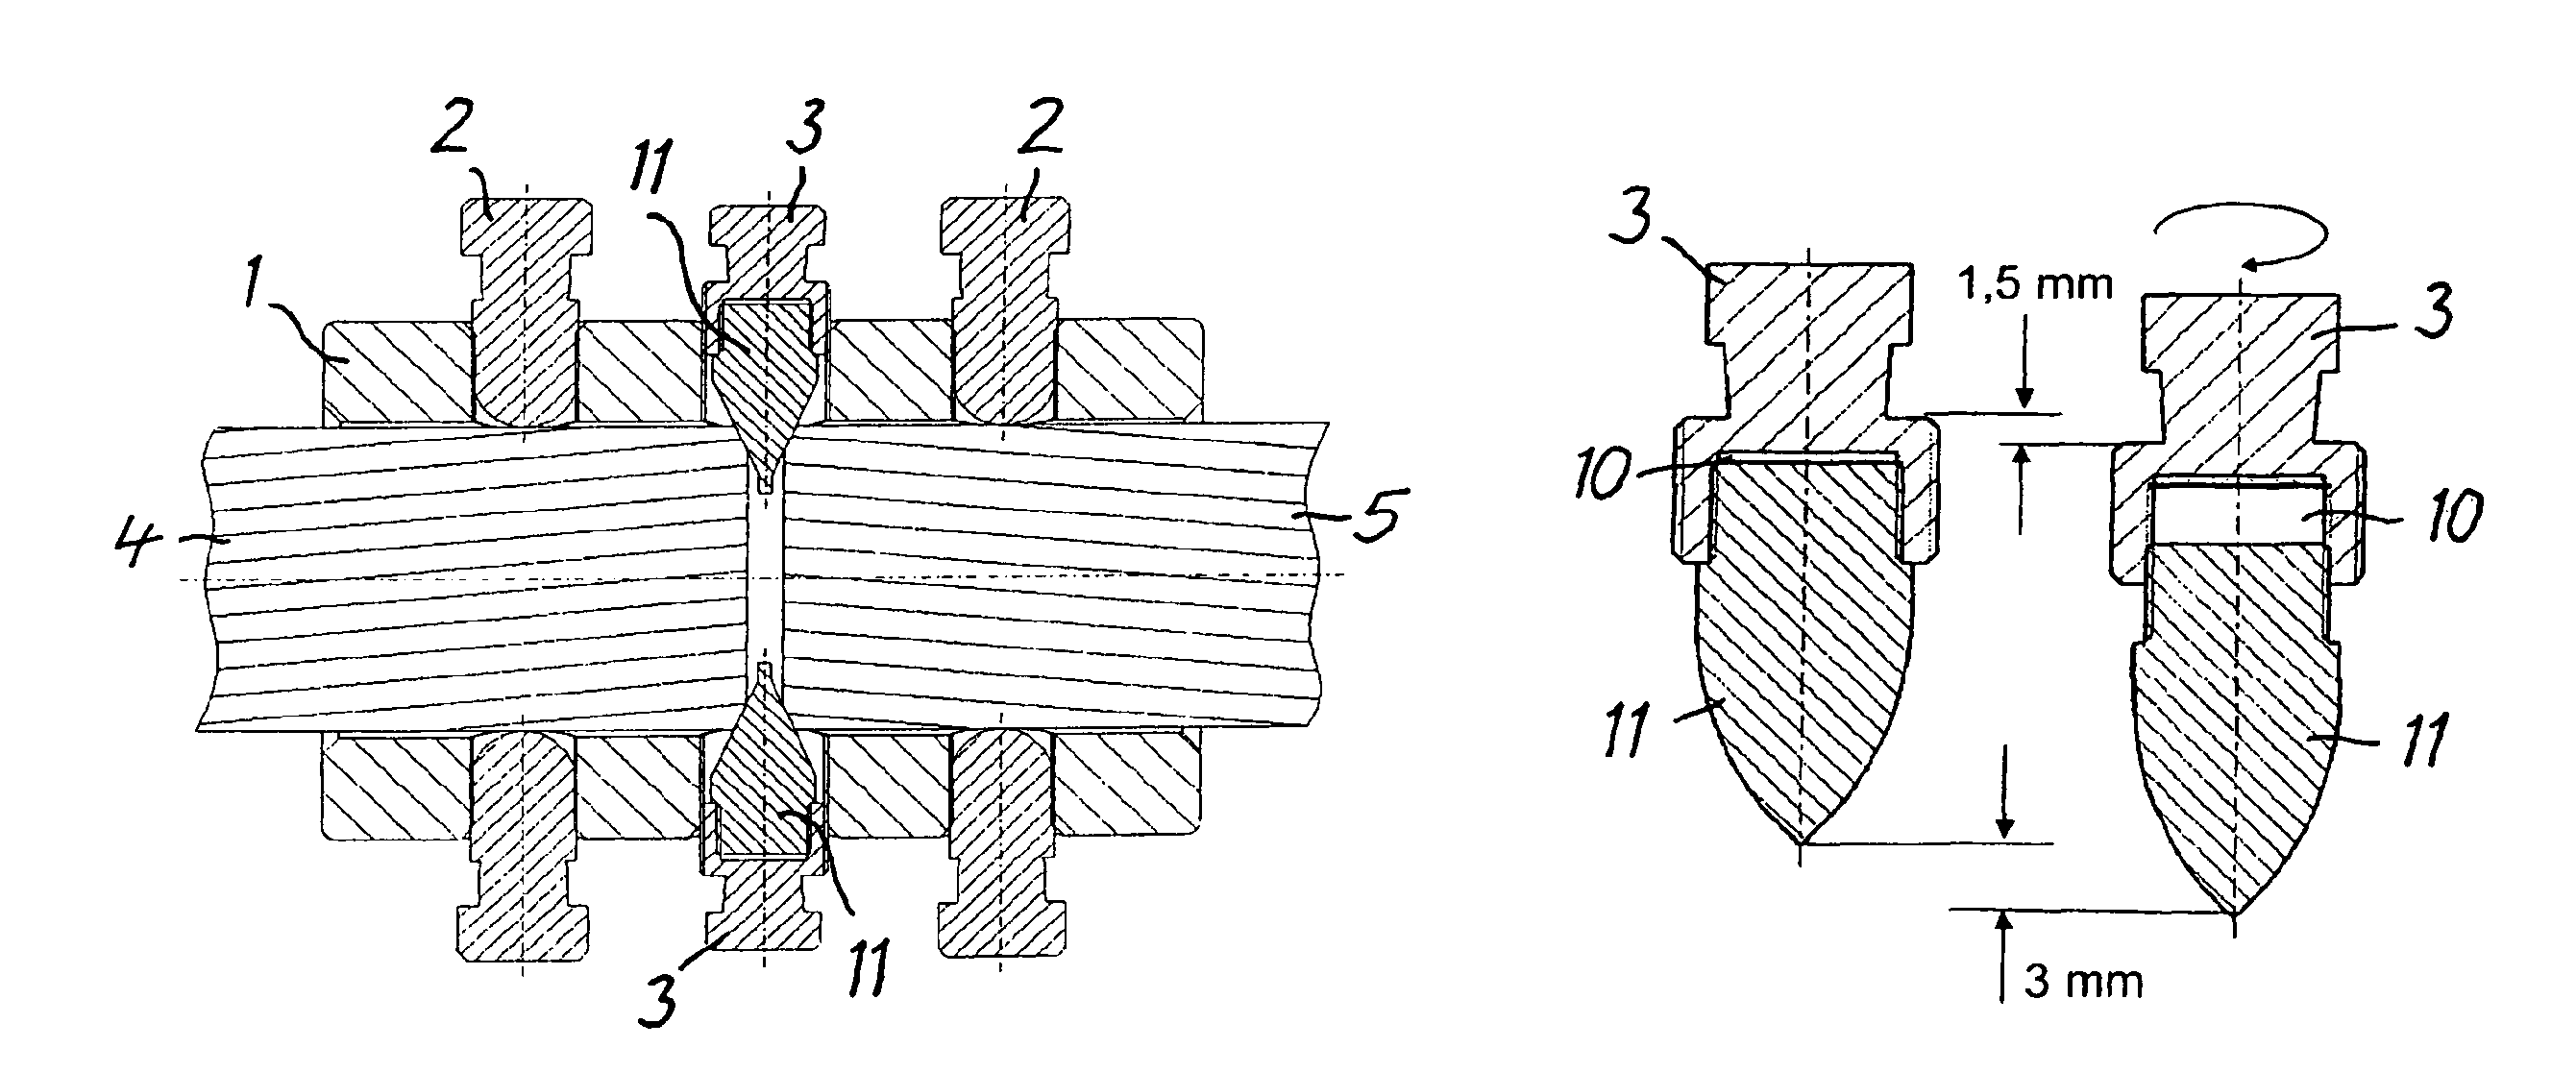 Device for connecting two electrical conductors